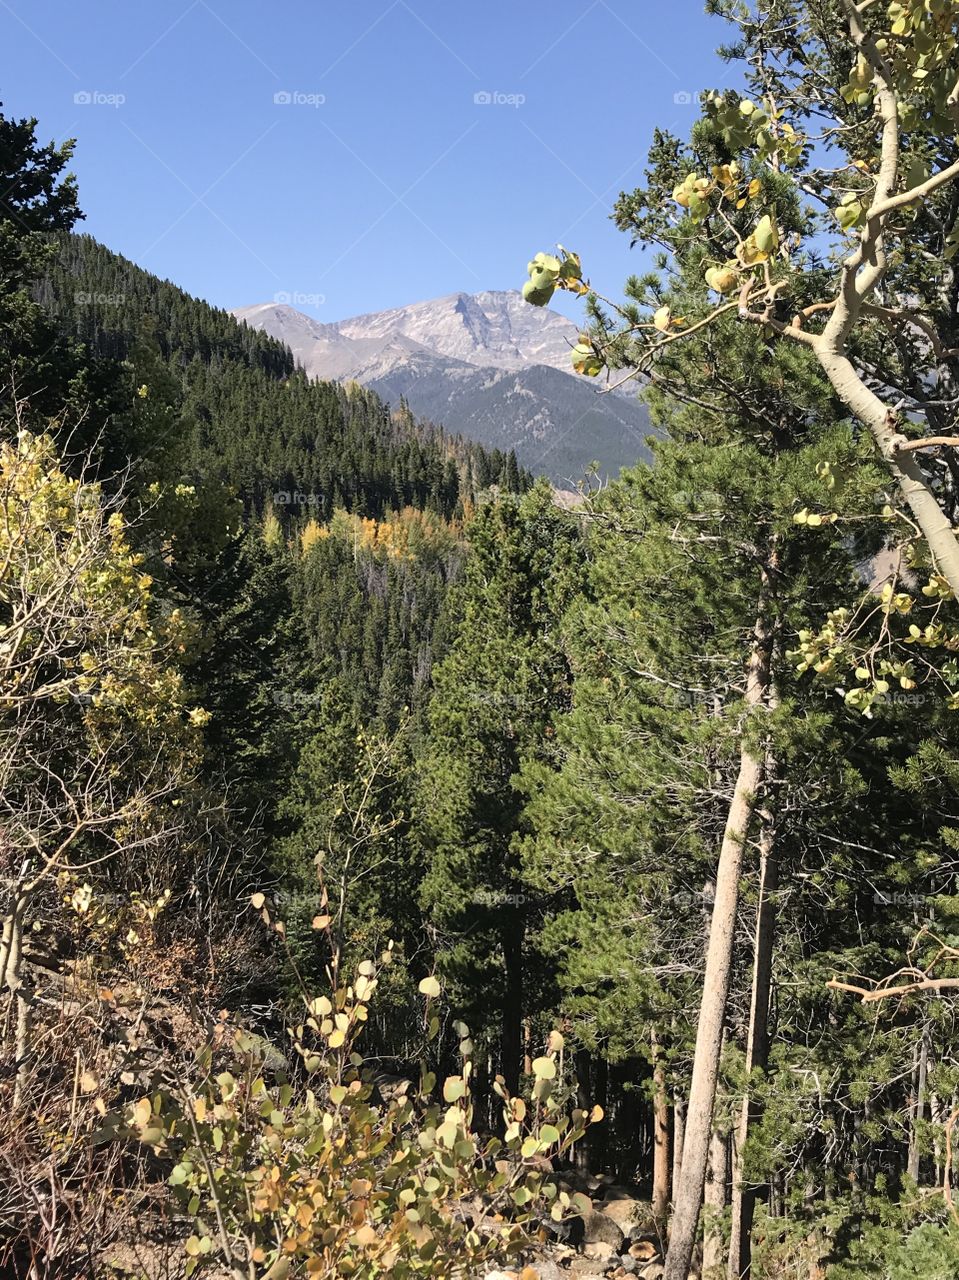 Rocky Mountain National Park - Aspen and pine trees with mountains in background 